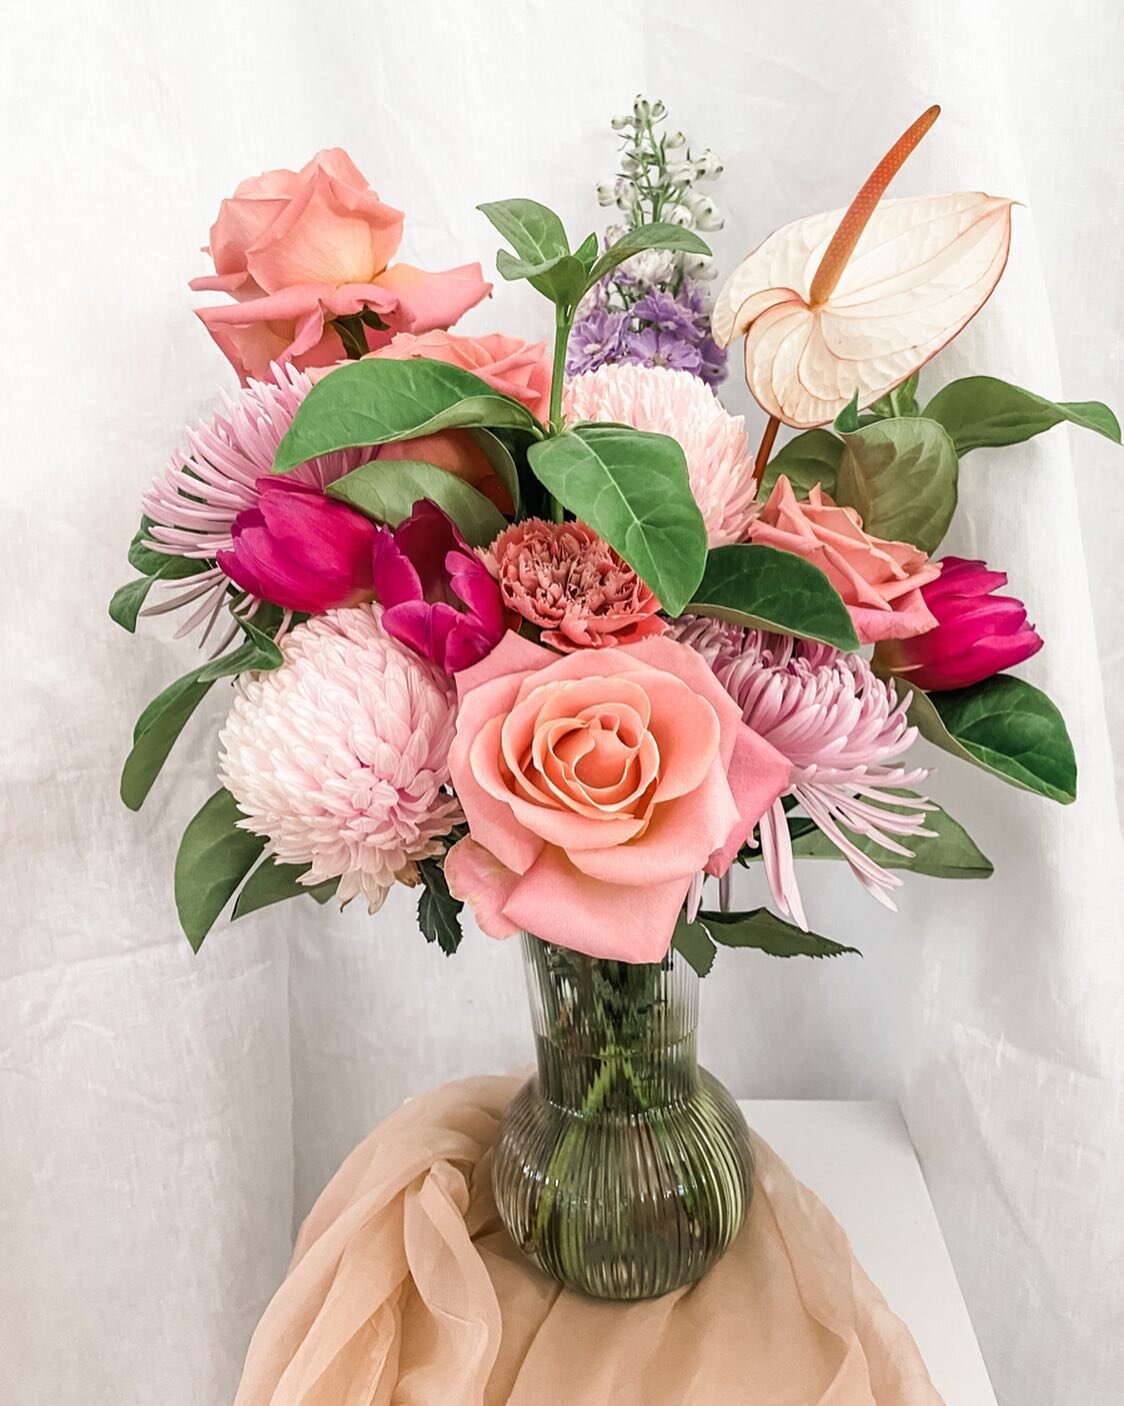 Mother&rsquo;s Day is only 3 weeks away 🌷

Pre-order our Mother&rsquo;s Day collection 

Limited availability so we recommend pre-ordering to secure your Mother&rsquo;s Day flowers. 

https://www.flowersbytegan.com.au/mothers-day-collection